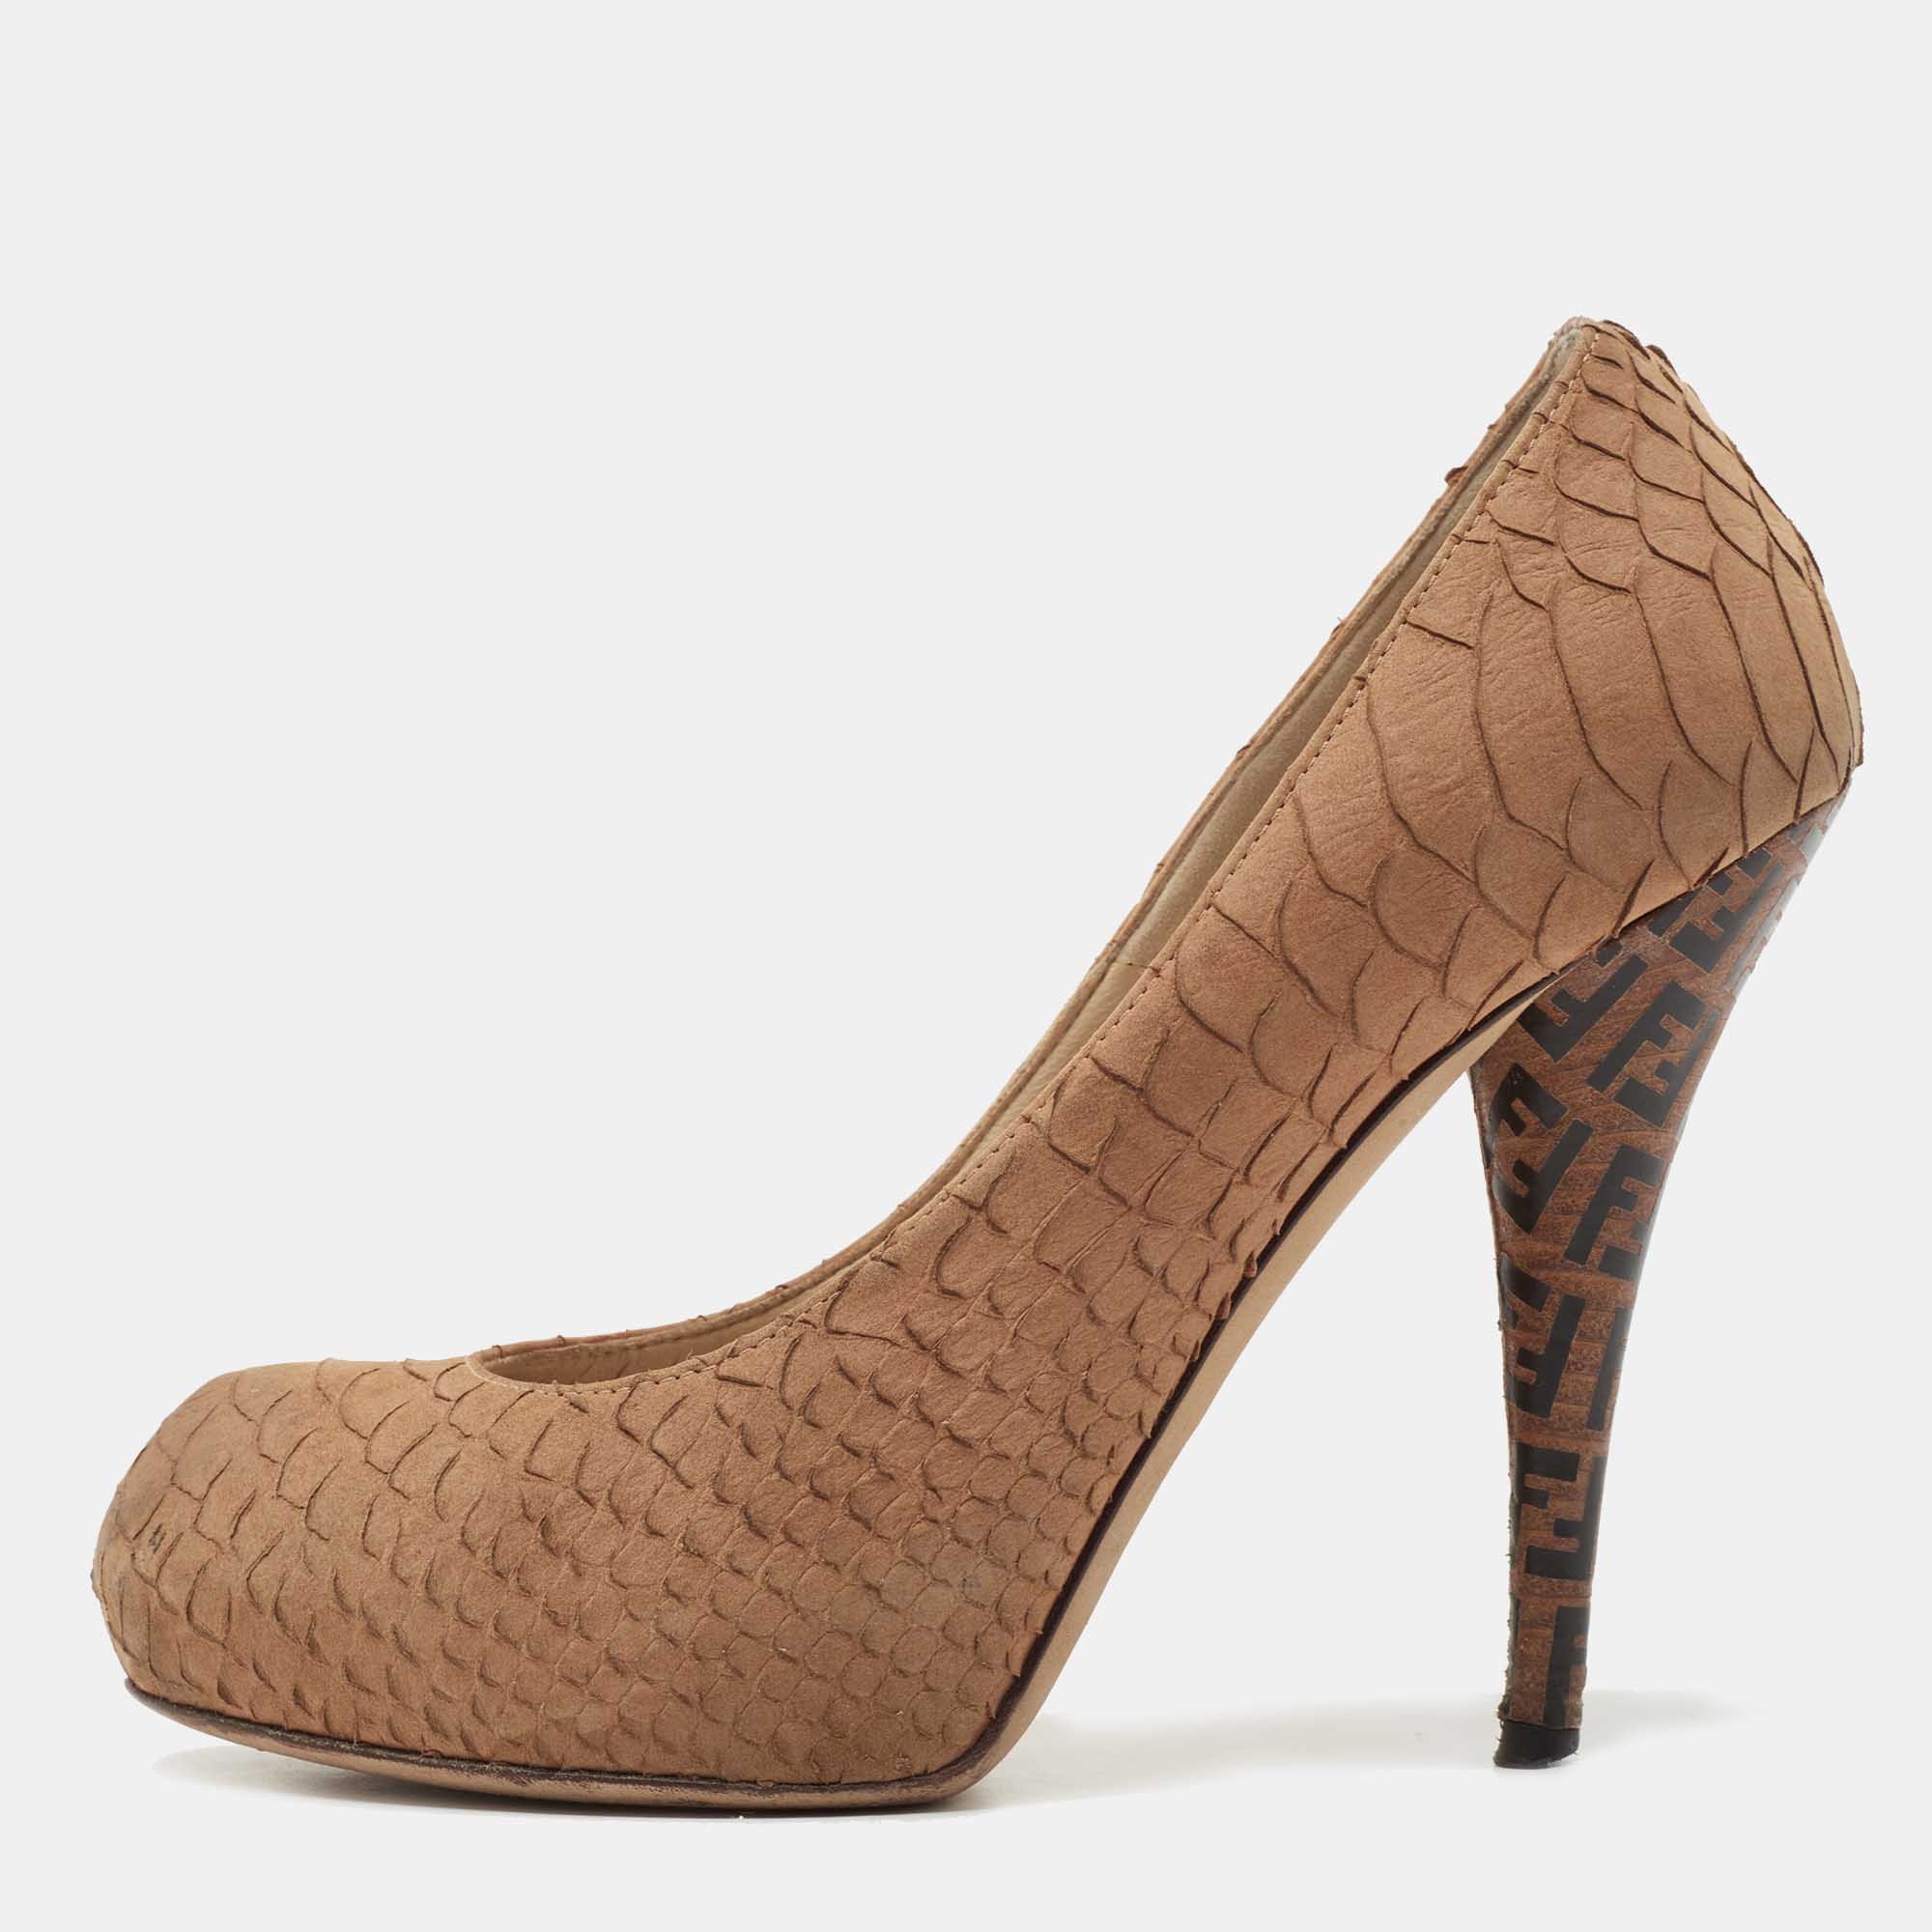 Made by Fendi this pair of pumps is the perfect mix of comfort and style. Amp up your style quotient by wearing this pair of patent python embossed pumps. This pair of brown pumps is complete with signature FF logo detailed stiletto heels.